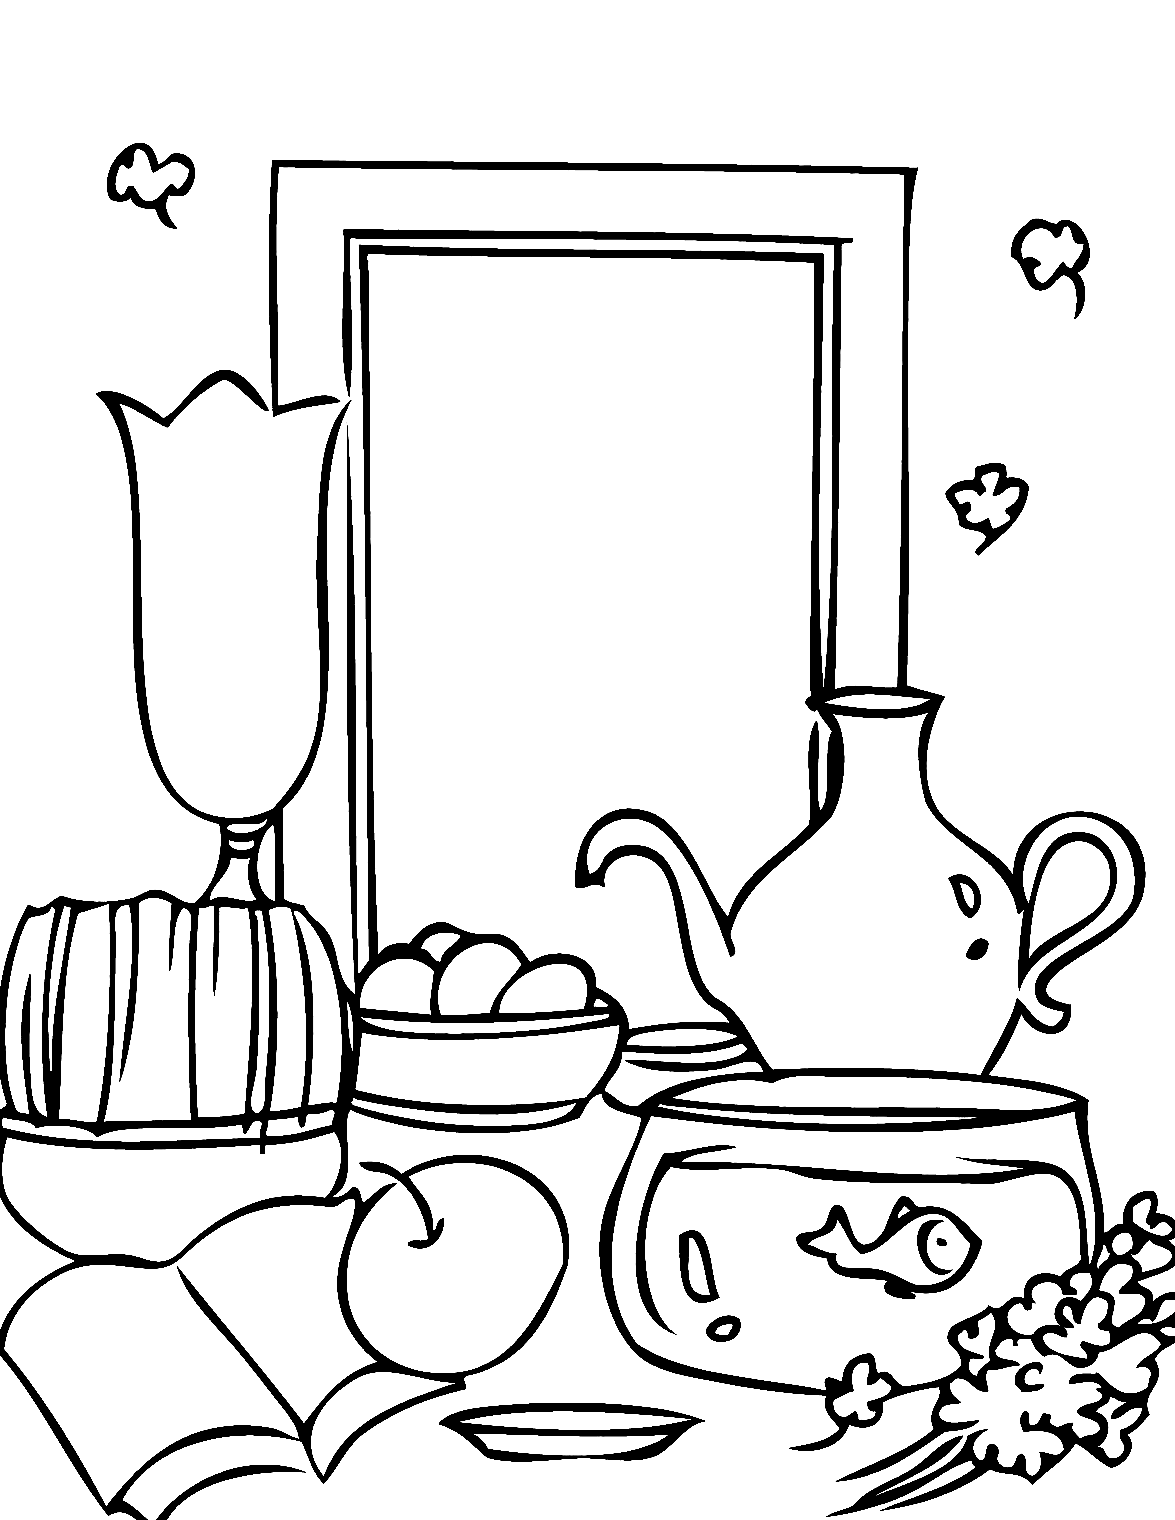 International Day of Nowruz Coloring Page